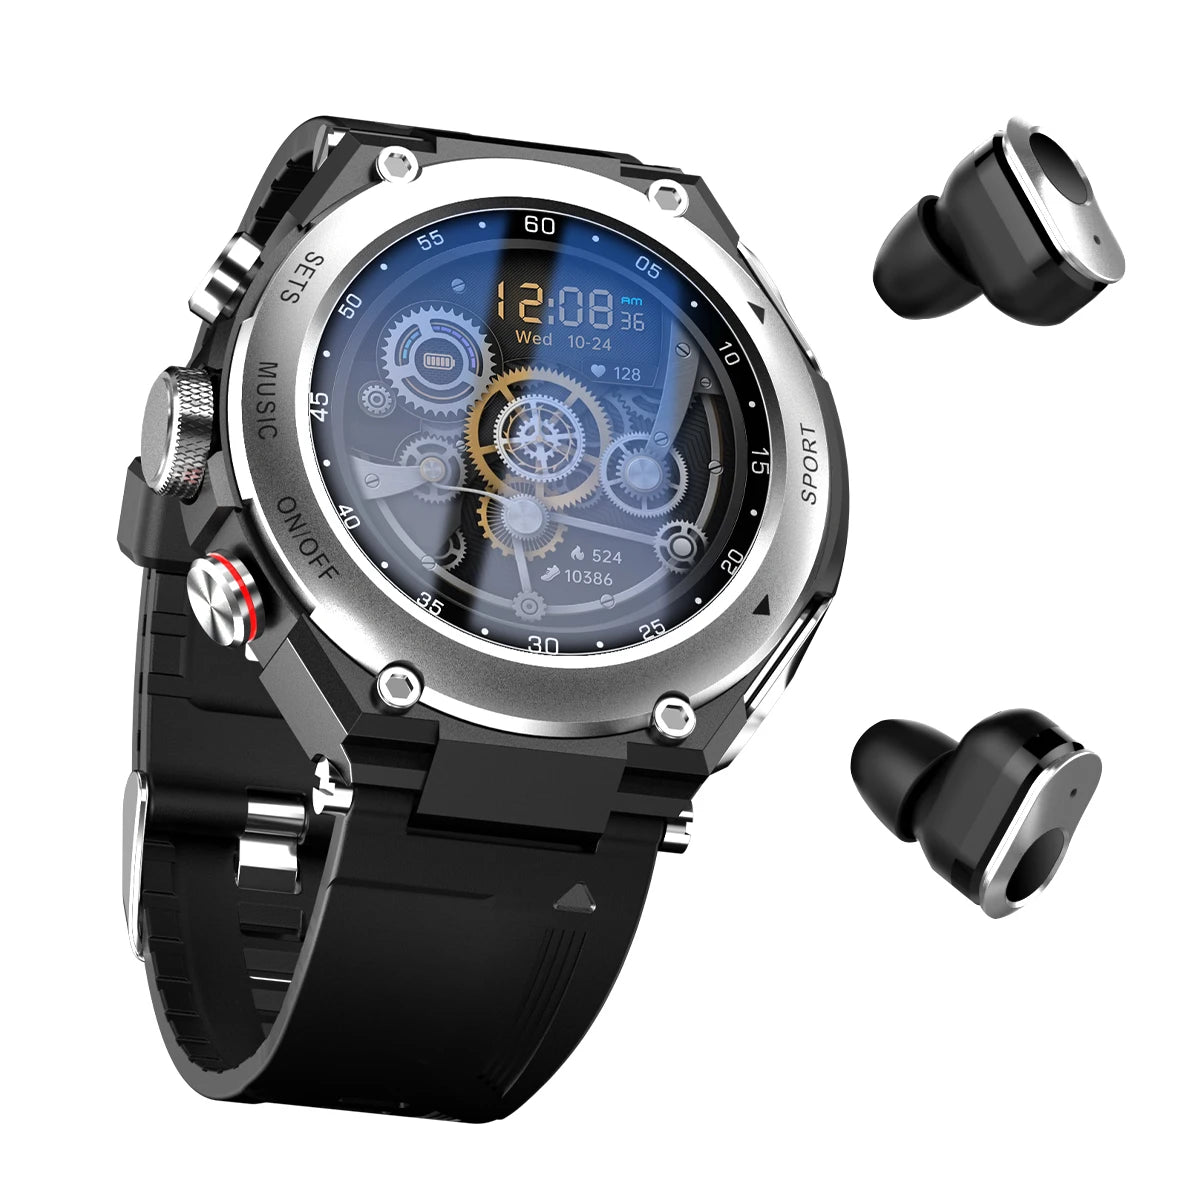 New T92 Pro Smartwatch with Earbuds - Bluetooth Headset, Speaker, Heart Rate Monitor, and Sports Tracker for Men and Women